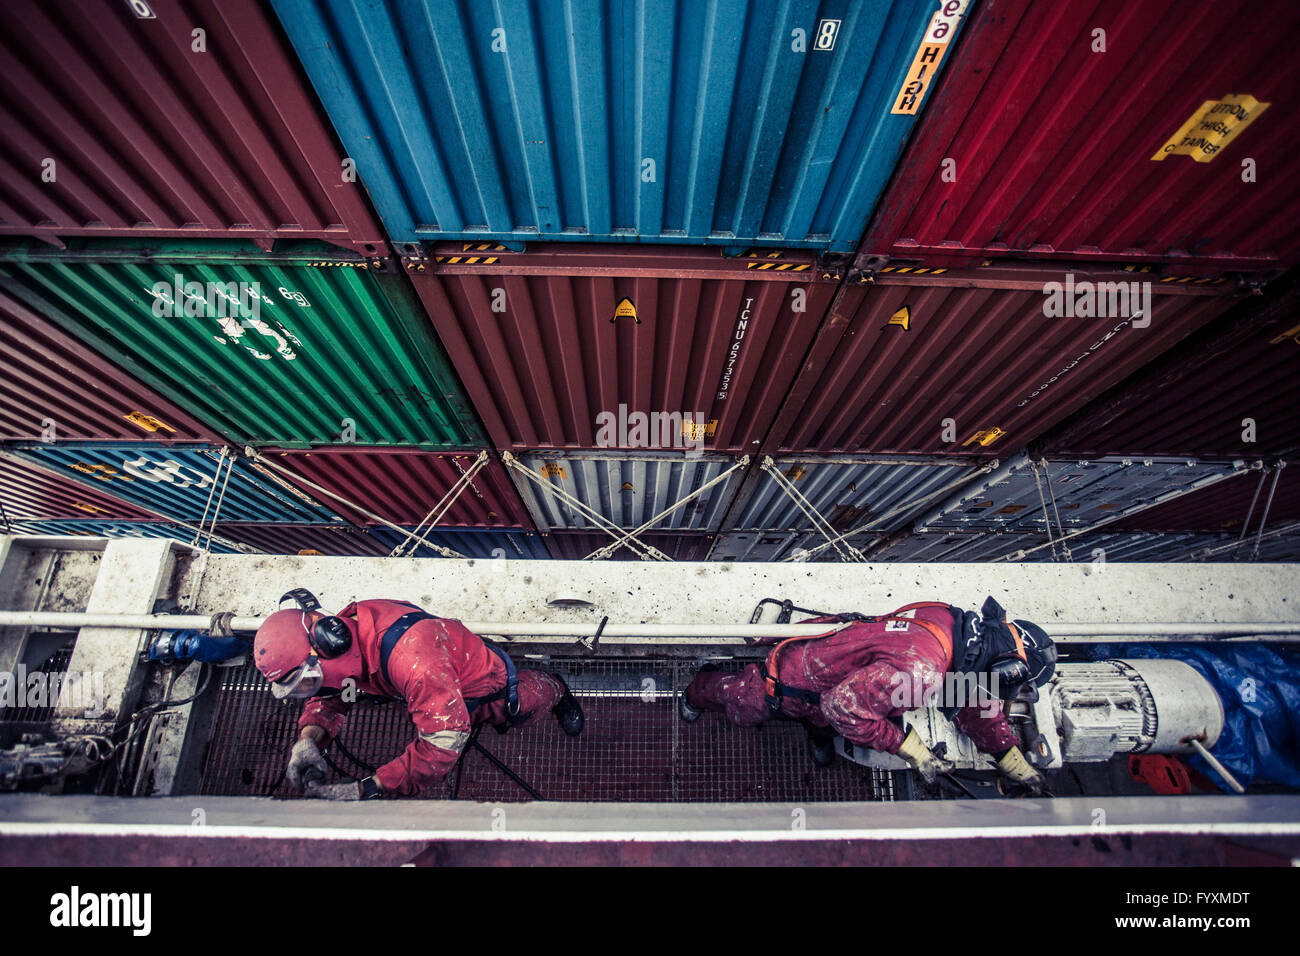 Workers maintaining a container ship while at sea Stock Photo